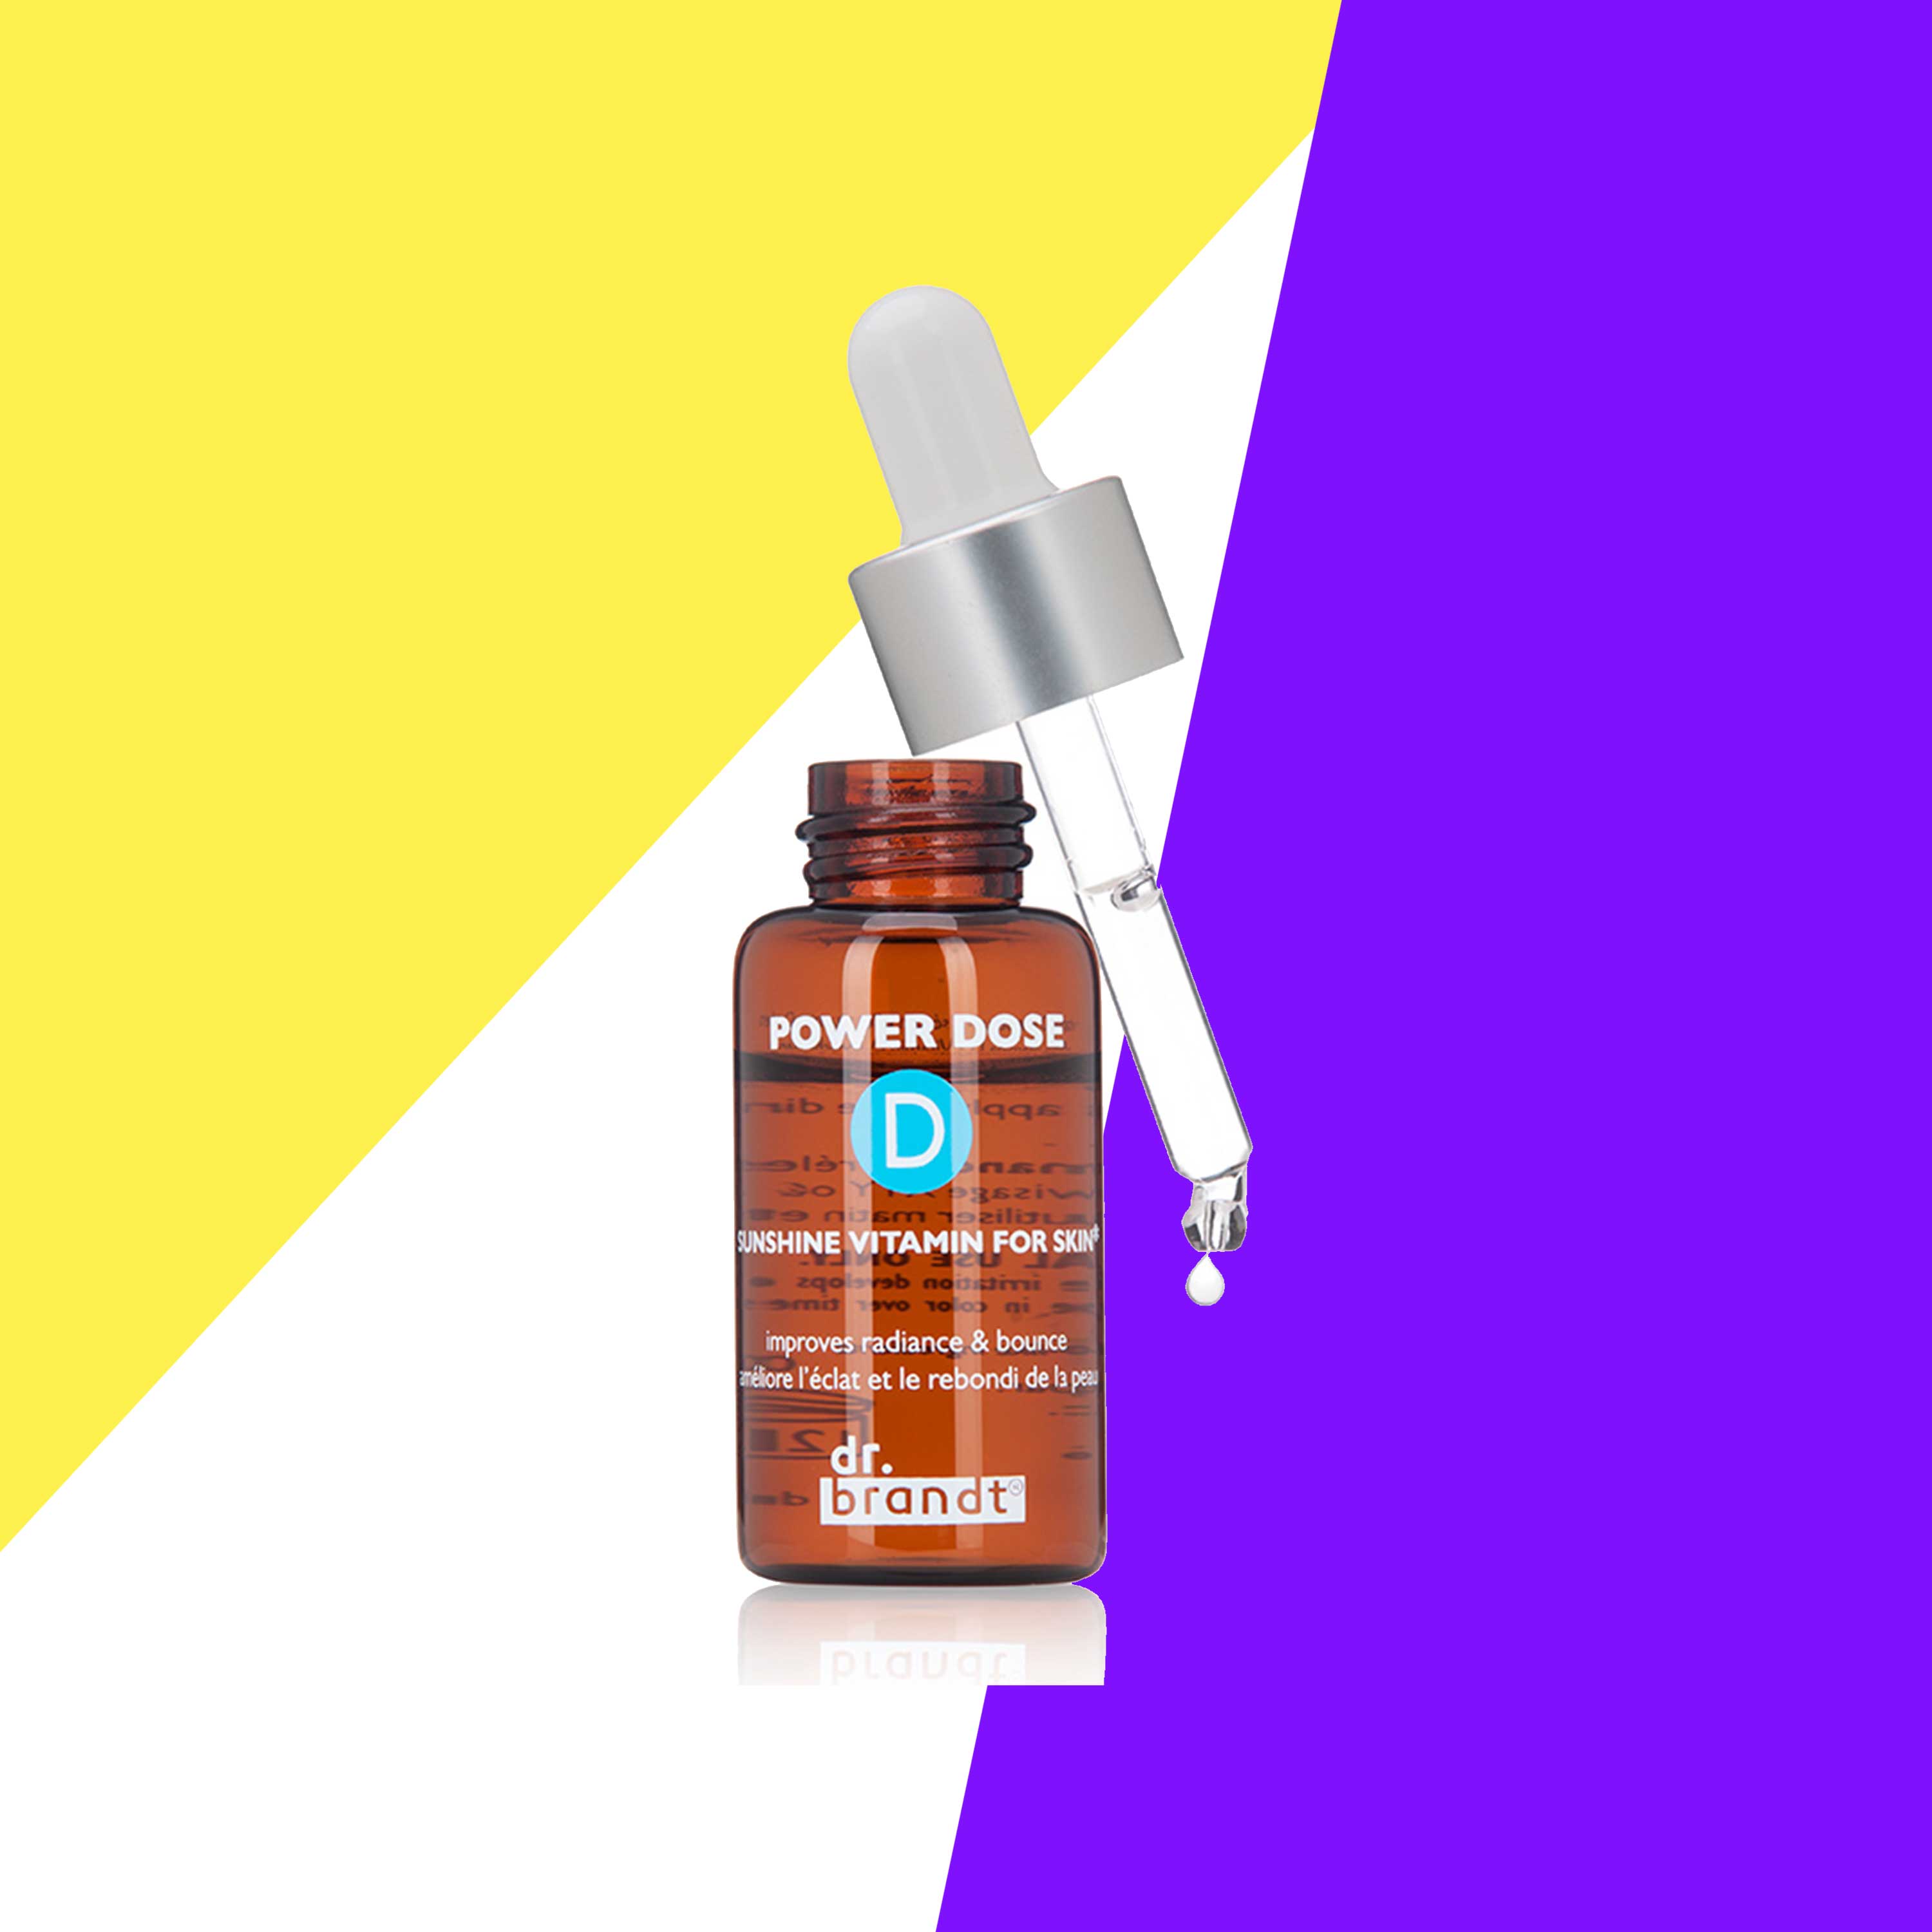 We Asked Dermatologists To Share Their Top Products For Hyperpigmentation